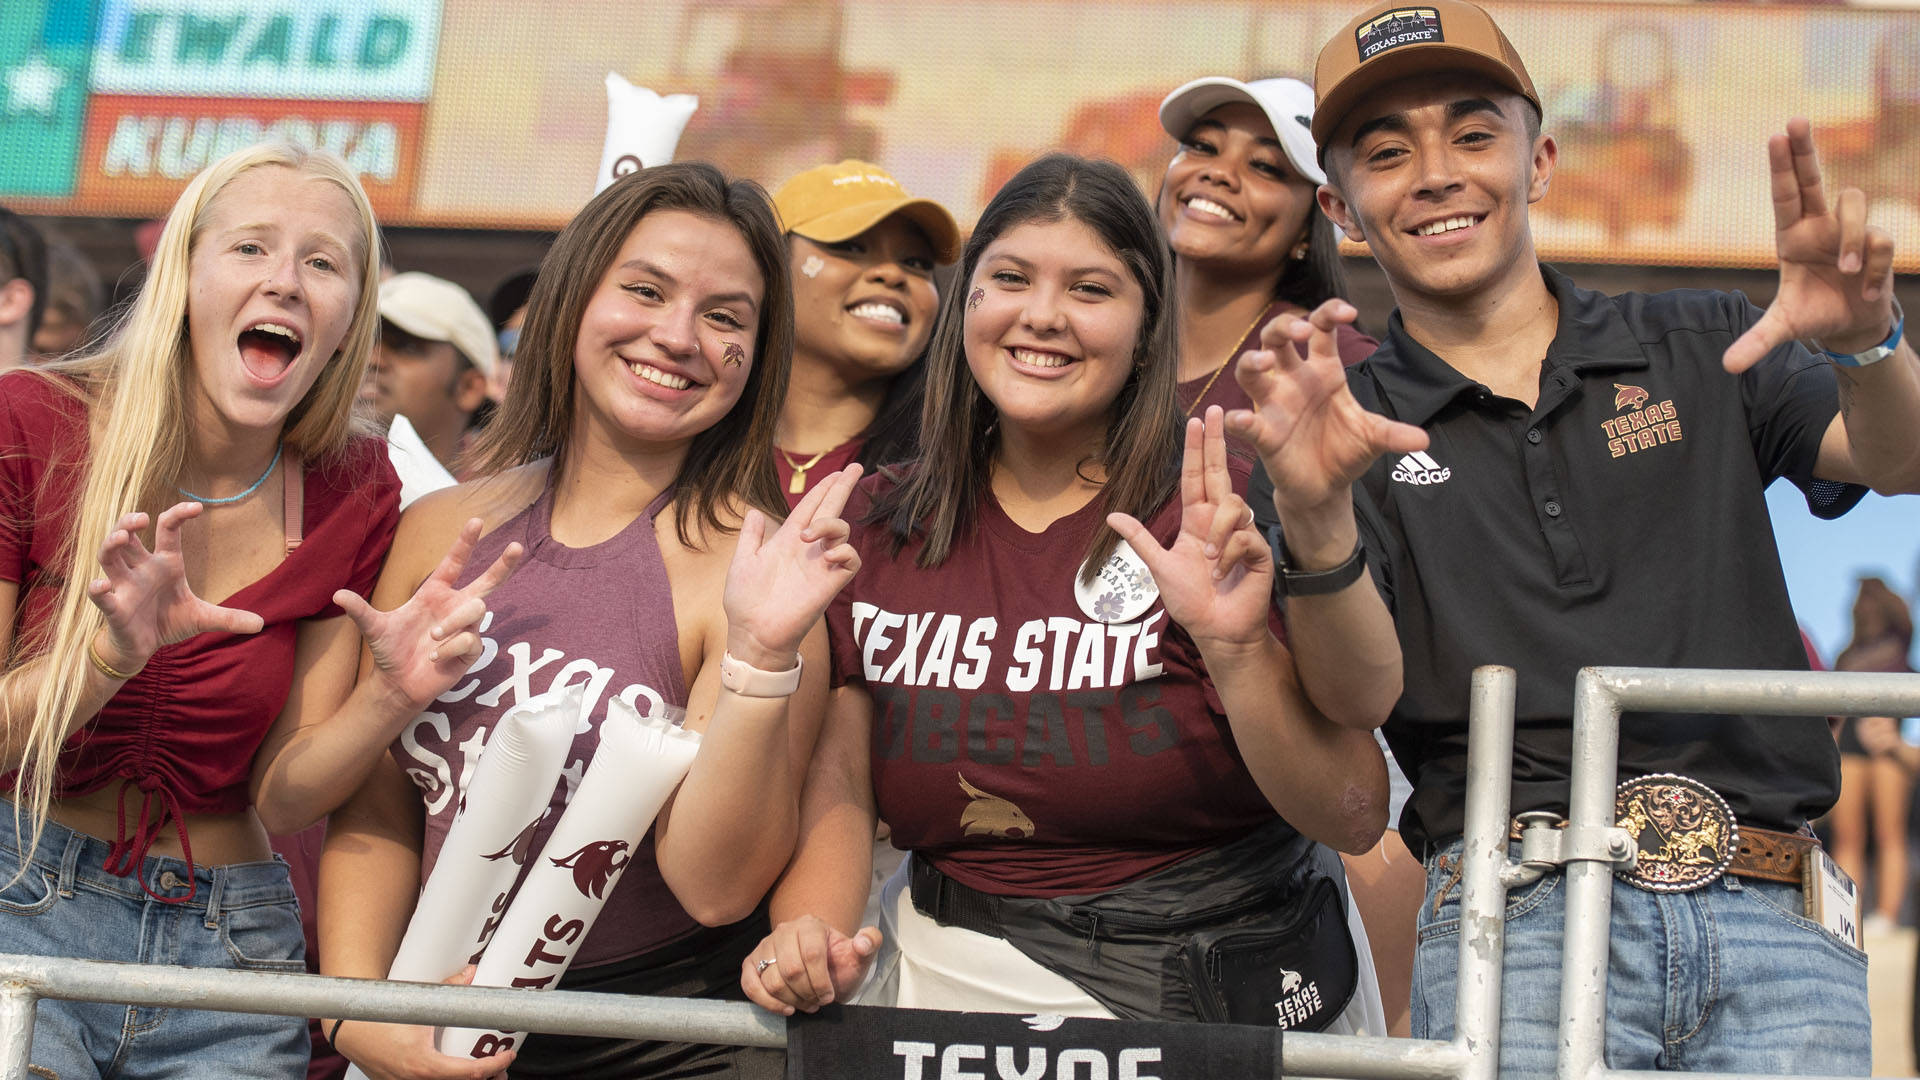 group of students smiling and making Texas State hand symbols at a Texas State Football game